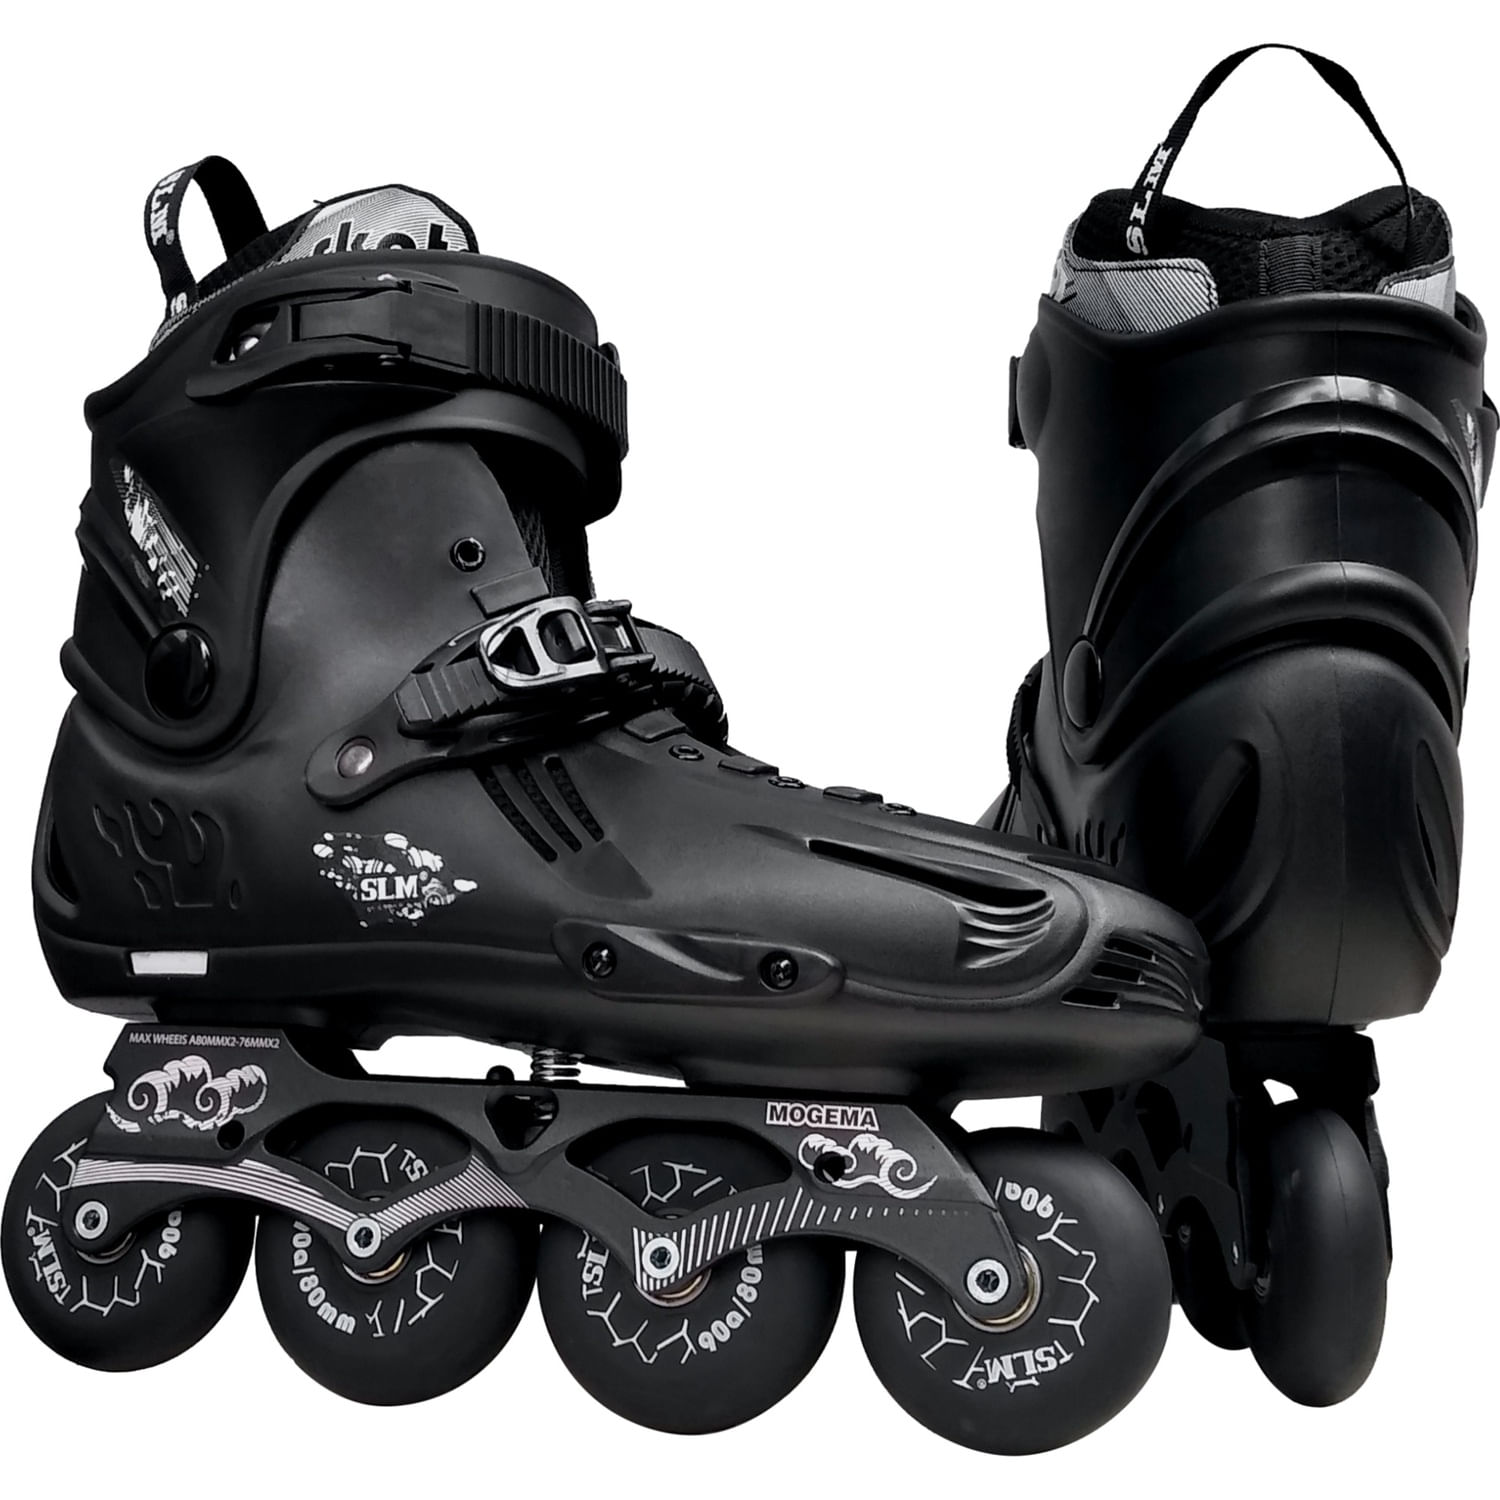 Patines Lineales T/37 SLM Freestyle Profesionales